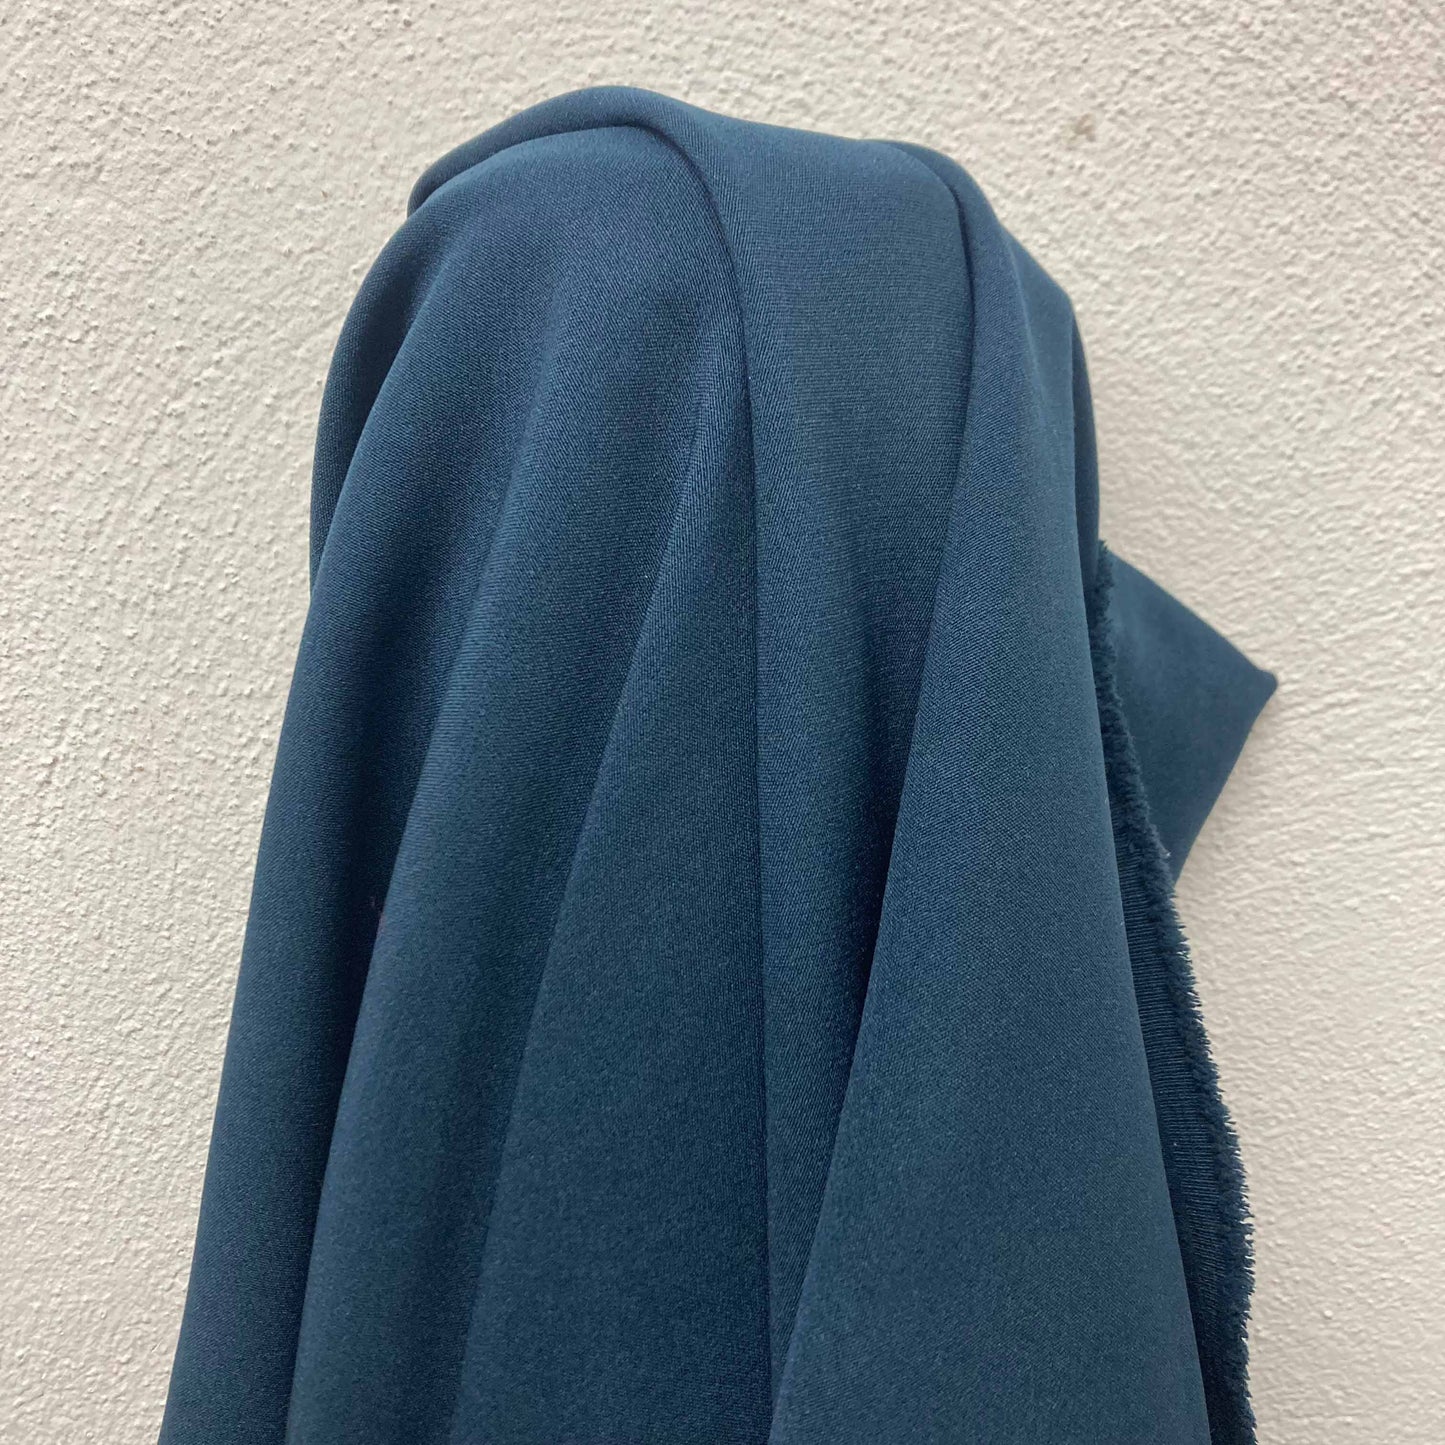 Stretch Suiting Fabric - Teal